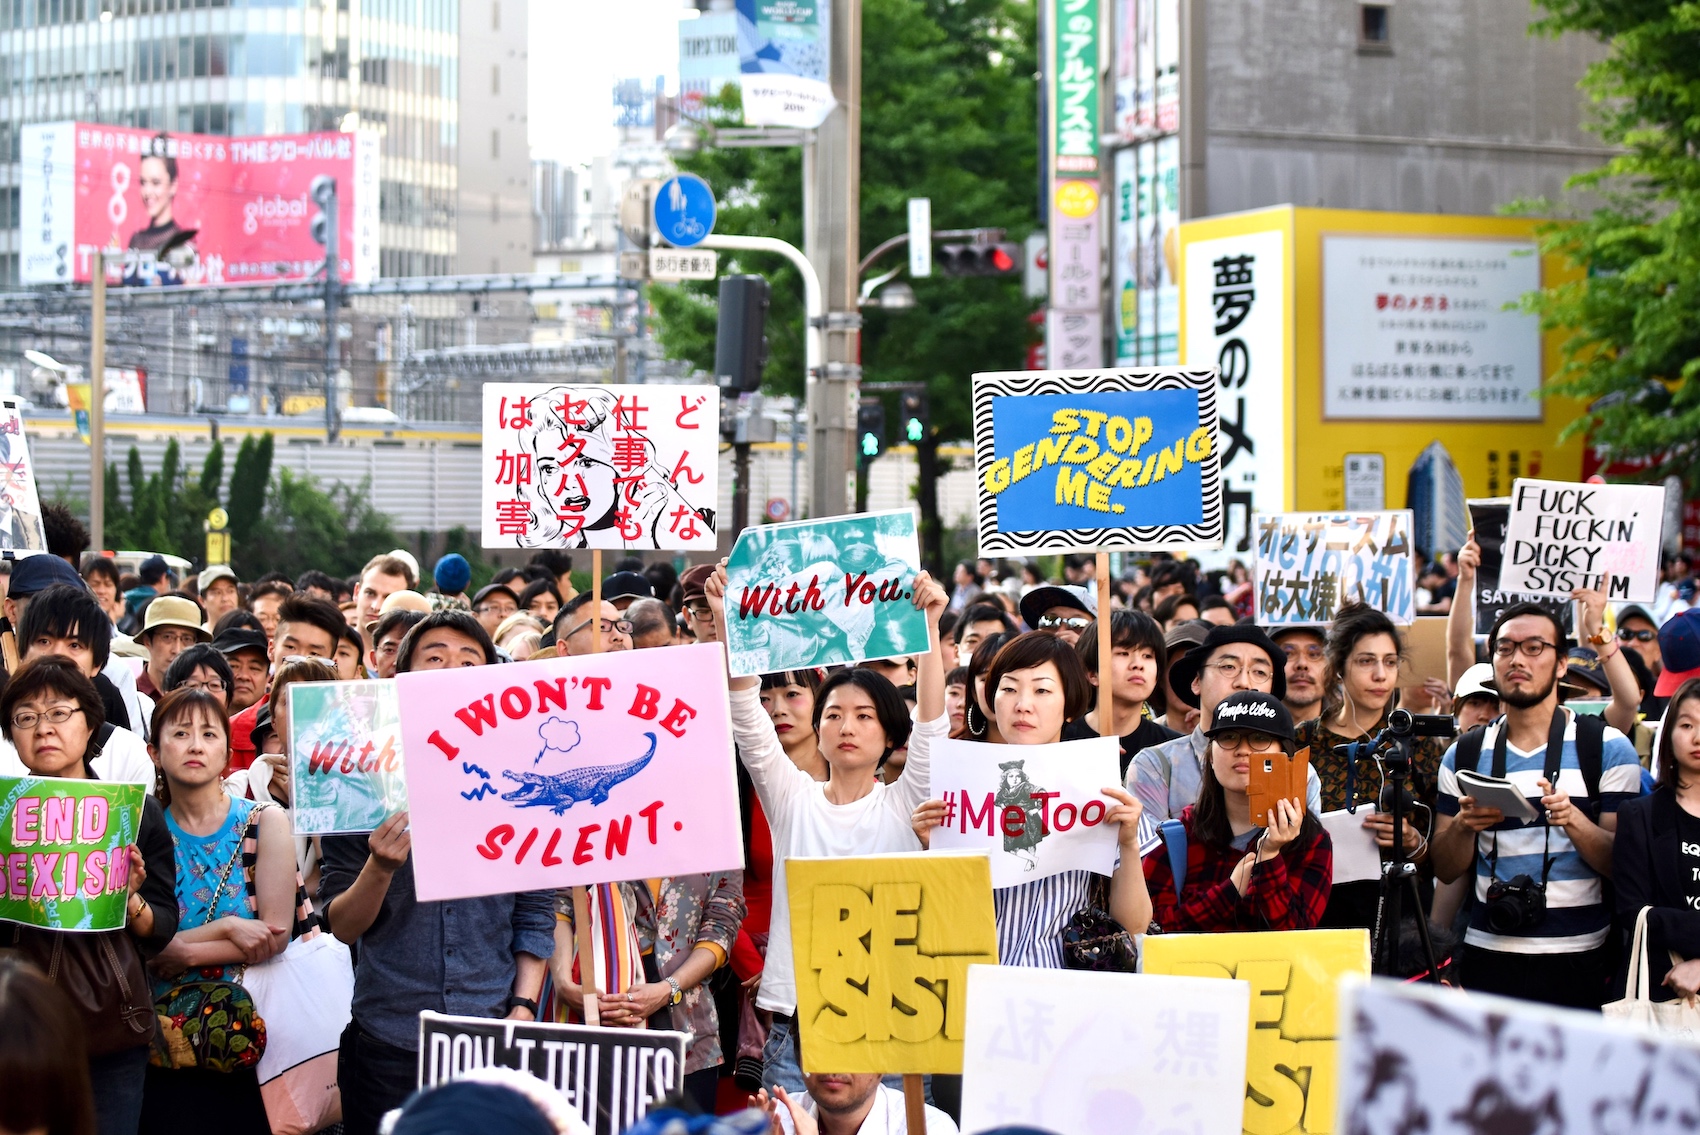 Demonstrators hold signs during a rally against sexual harassment in Shinjuku, Tokyo